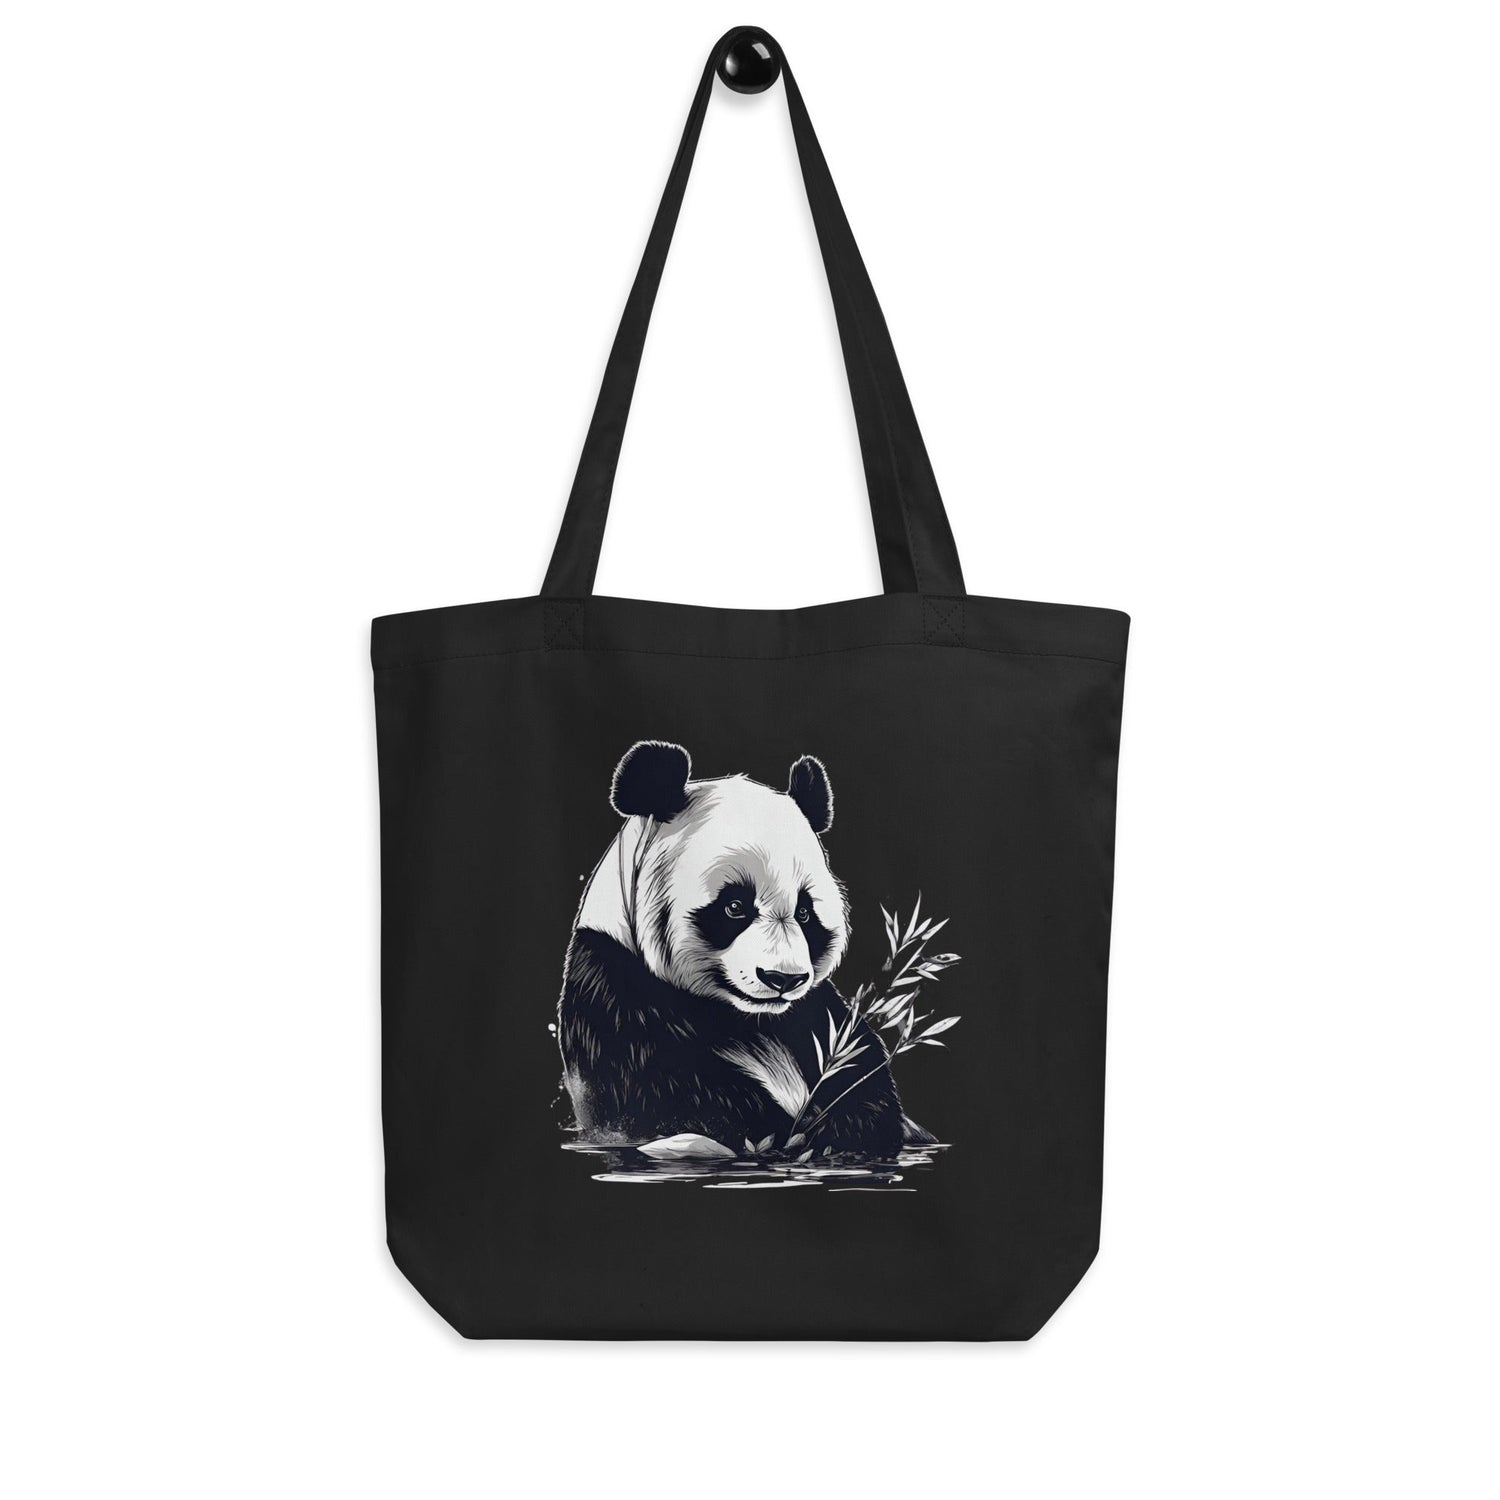 Tote Bags. Tote Bags for Women. Tote Bags for Men. Tote Bags for Kids. Wild Style Shop.